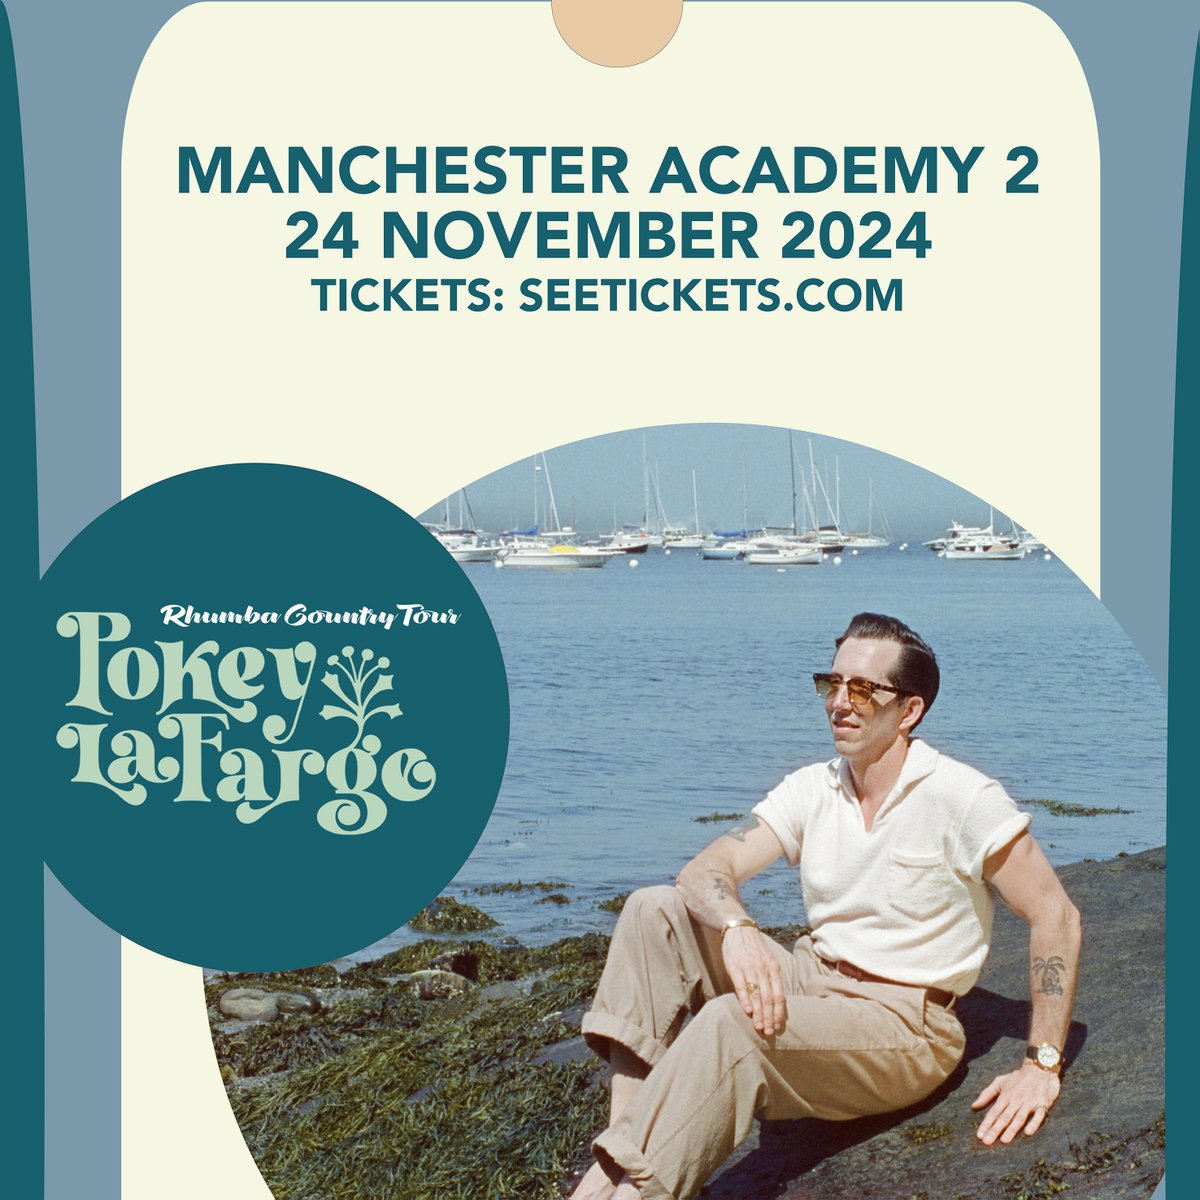 ON SALE: Tickets are now available for @PokeyLaFarge at @MancAcademy 2 on 24 November. Read more, listen to his latest singles, and book now: heymanchester.com/pokey-lafarge#…